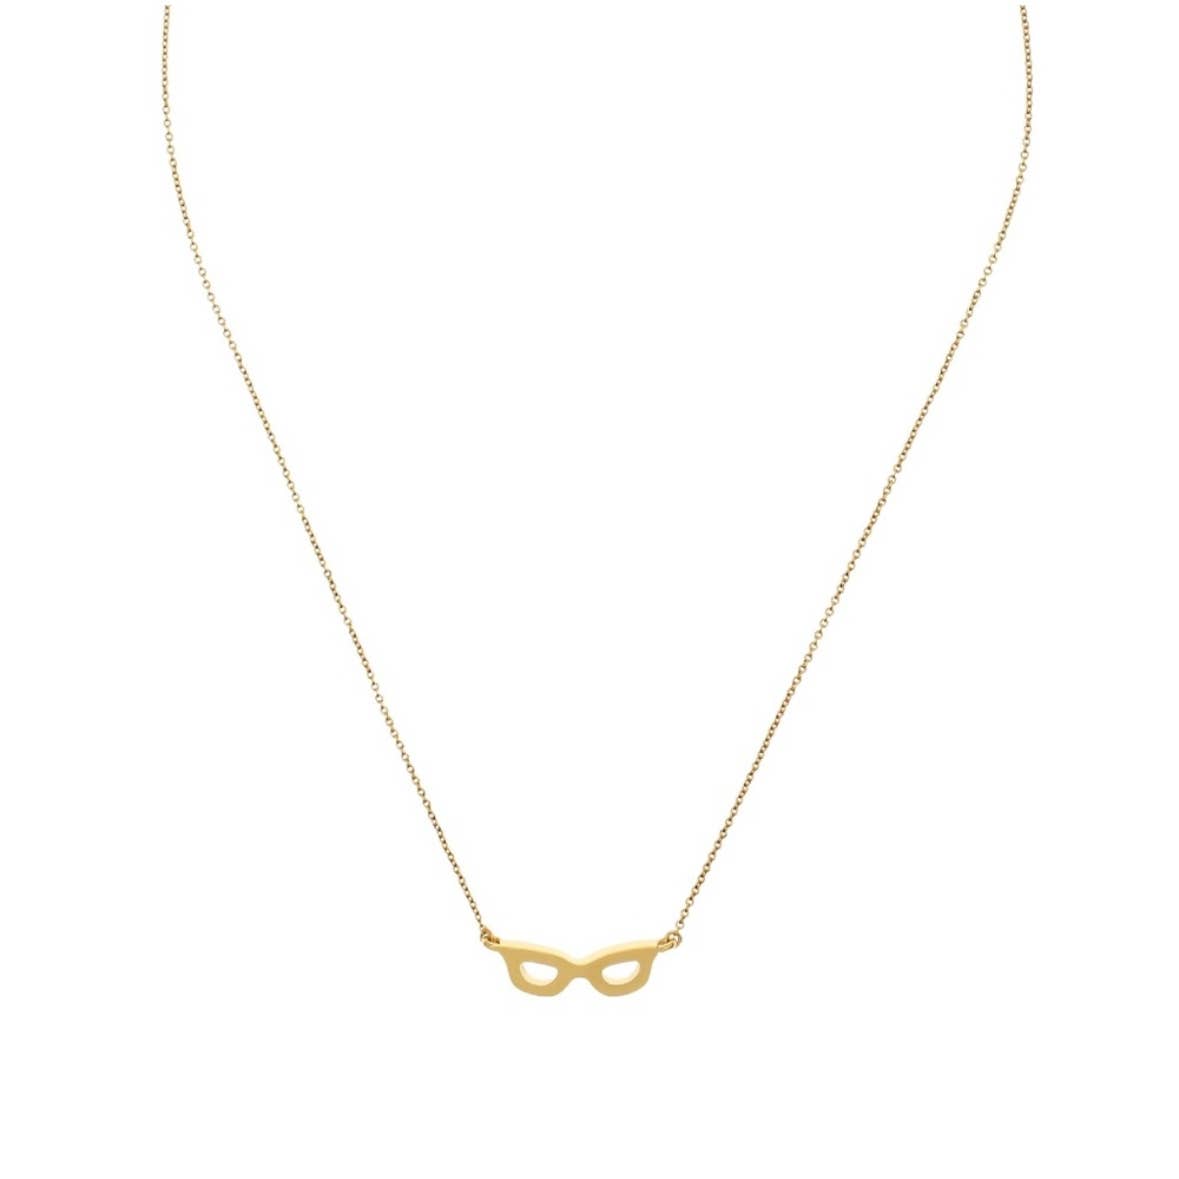 KATE SPADE New York Lookout Glasses Mini Pendant Necklace